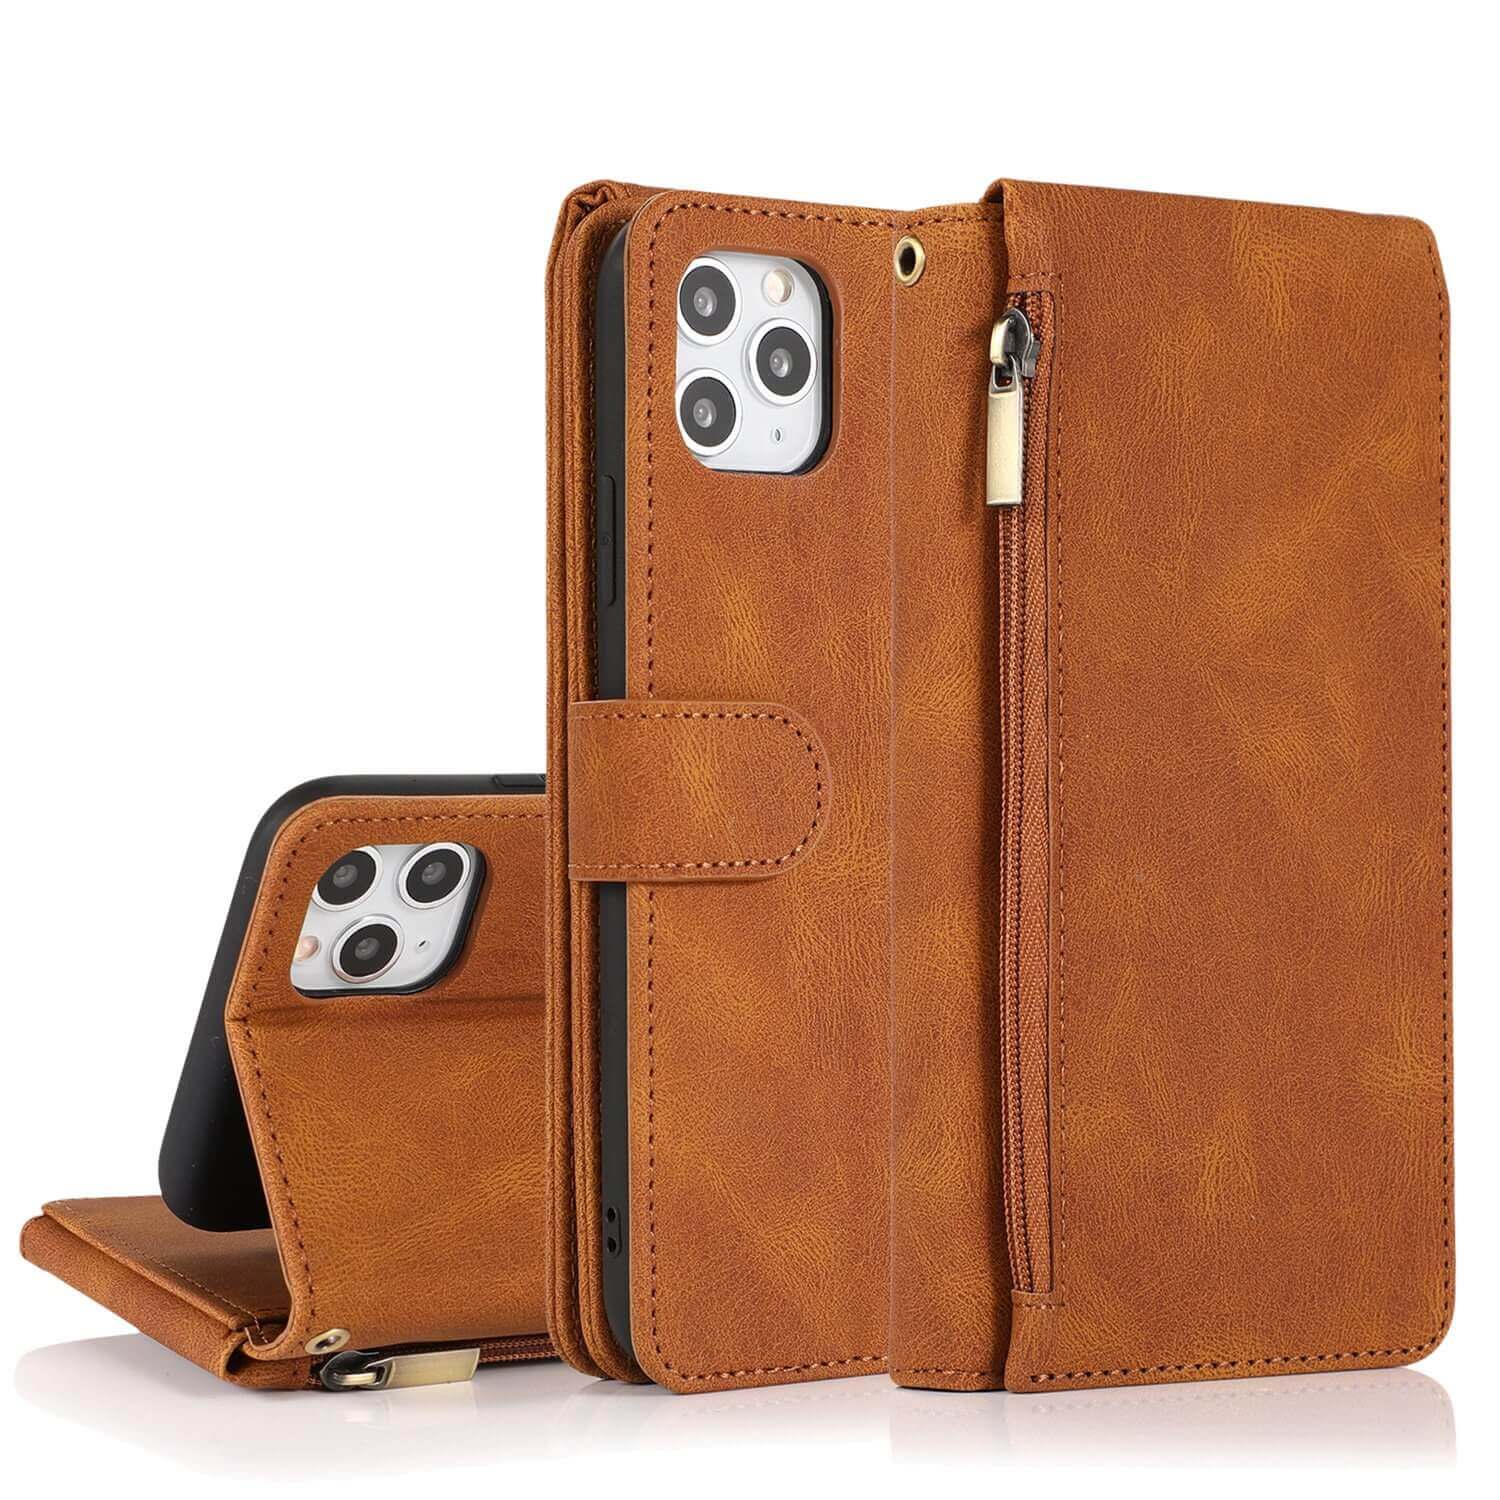 Protective Solid Color Multi Card Slots Phone Case Wallet with Built-in Kickstand for iPhone